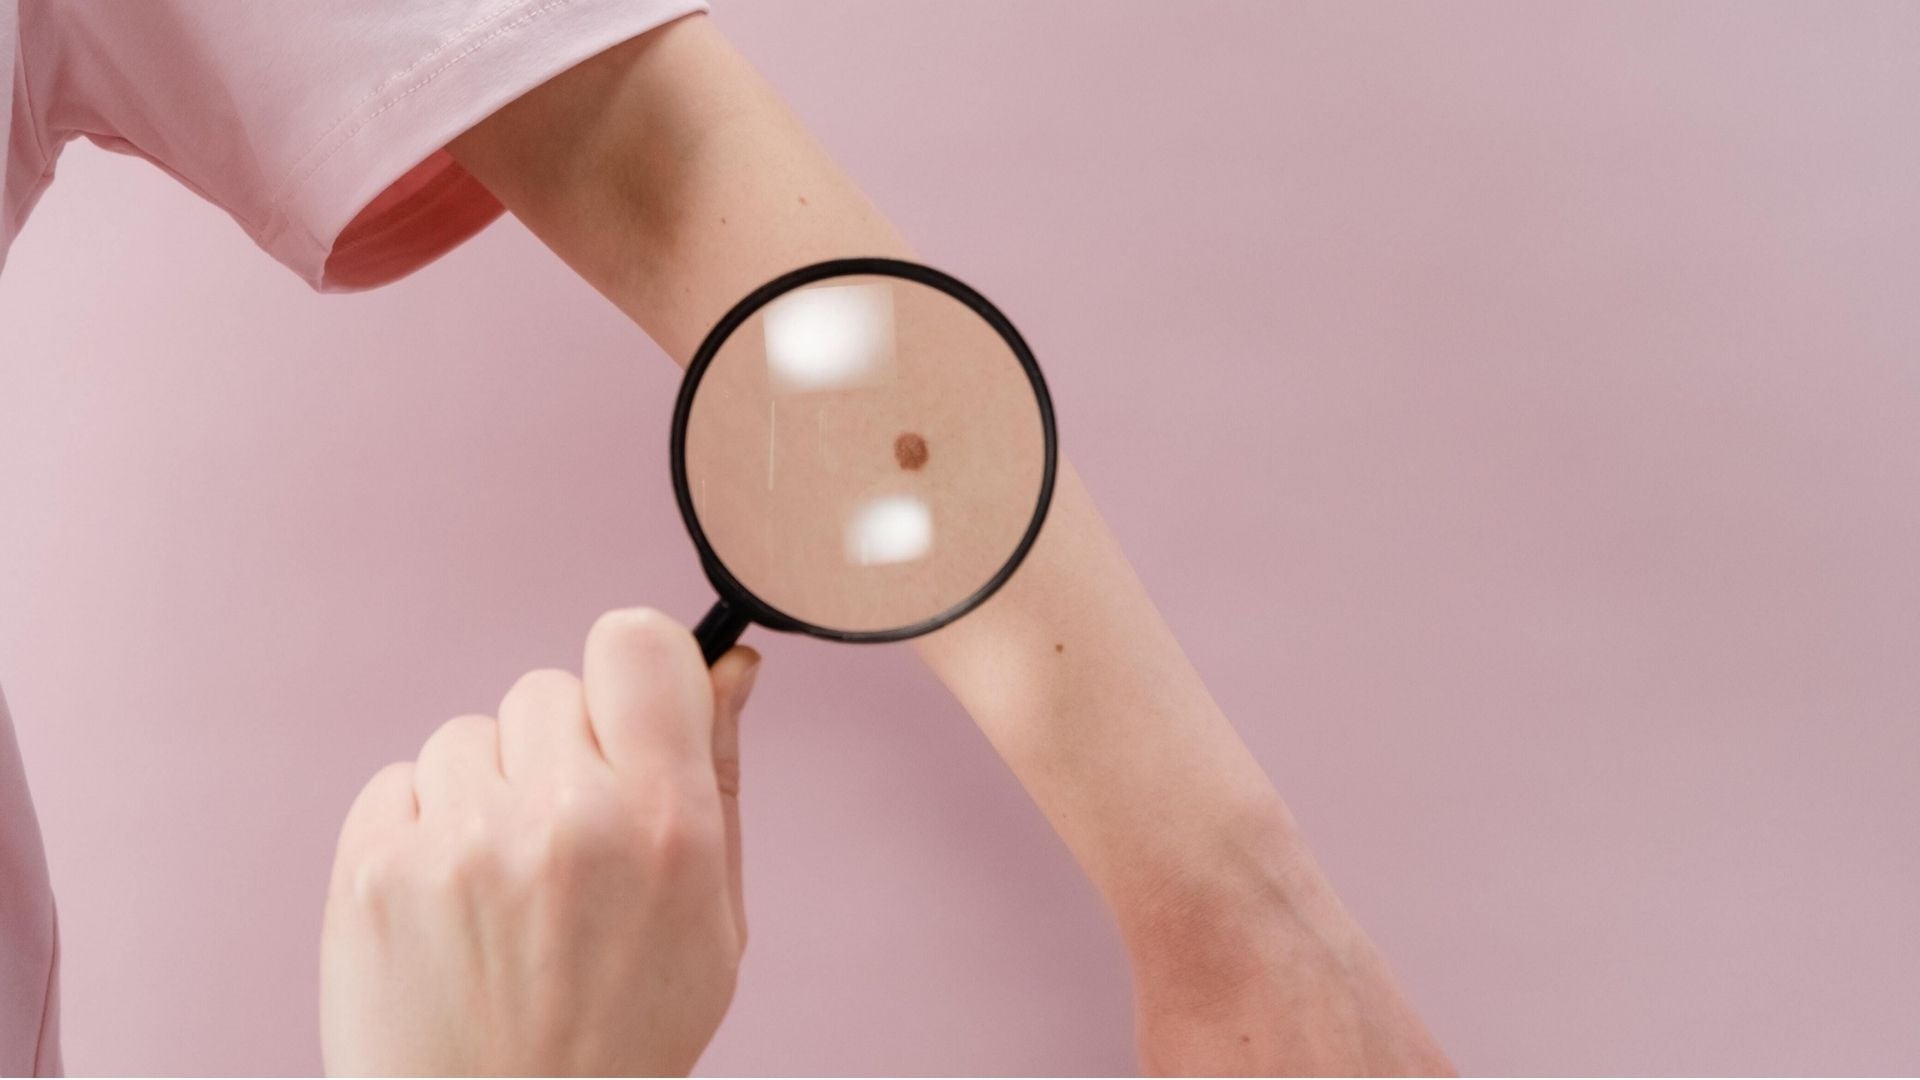 Magnifying glass spotting a mole or melanoma on a woman's arm